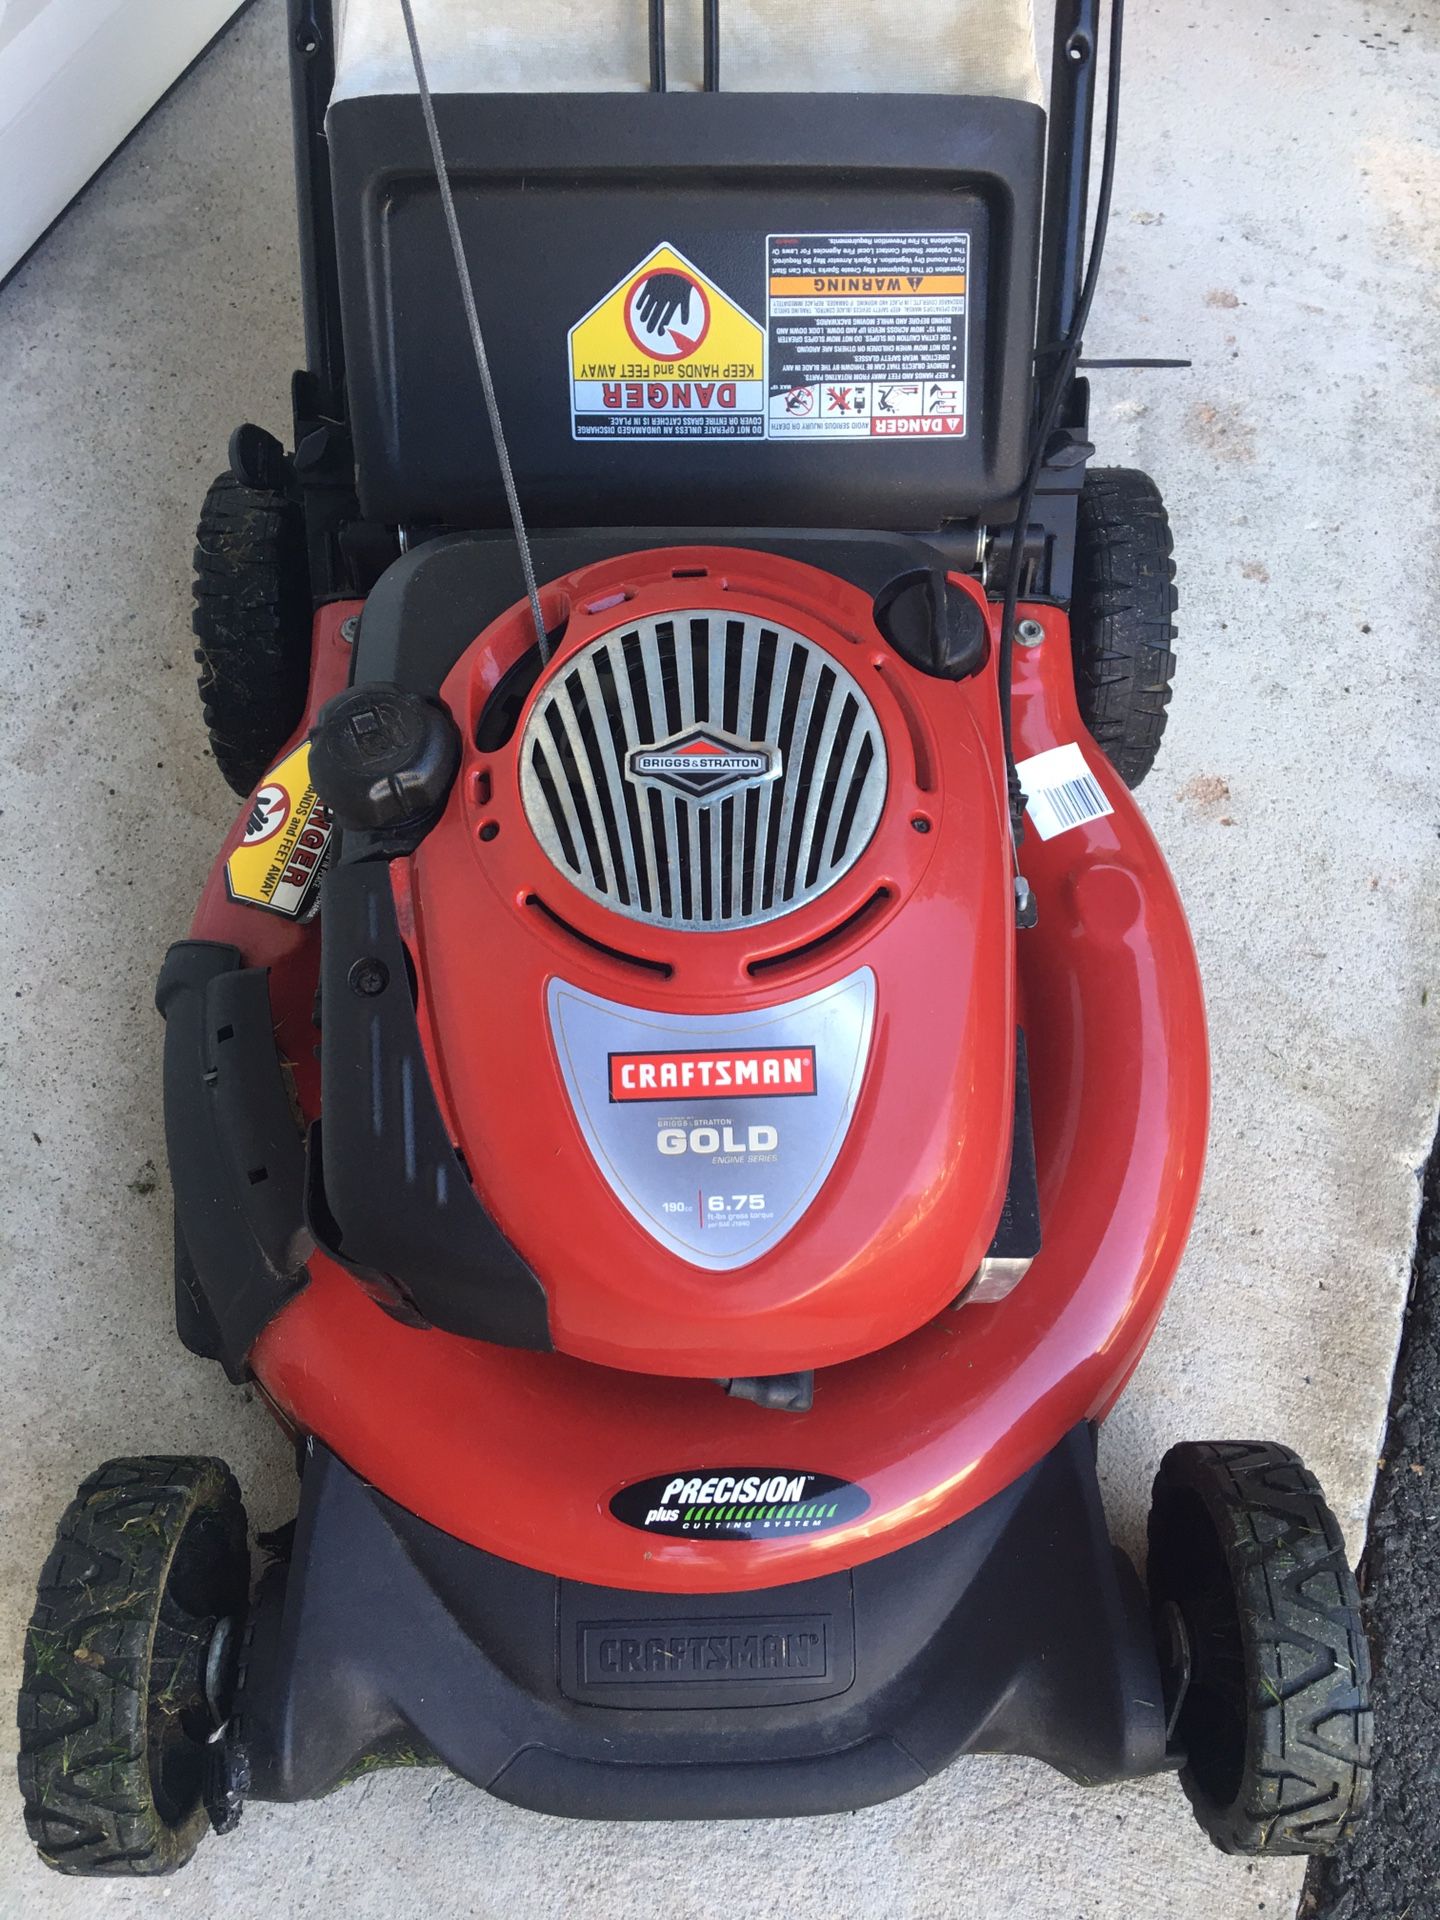 Craftsman Gold 6.75hp 190cc mower with bag